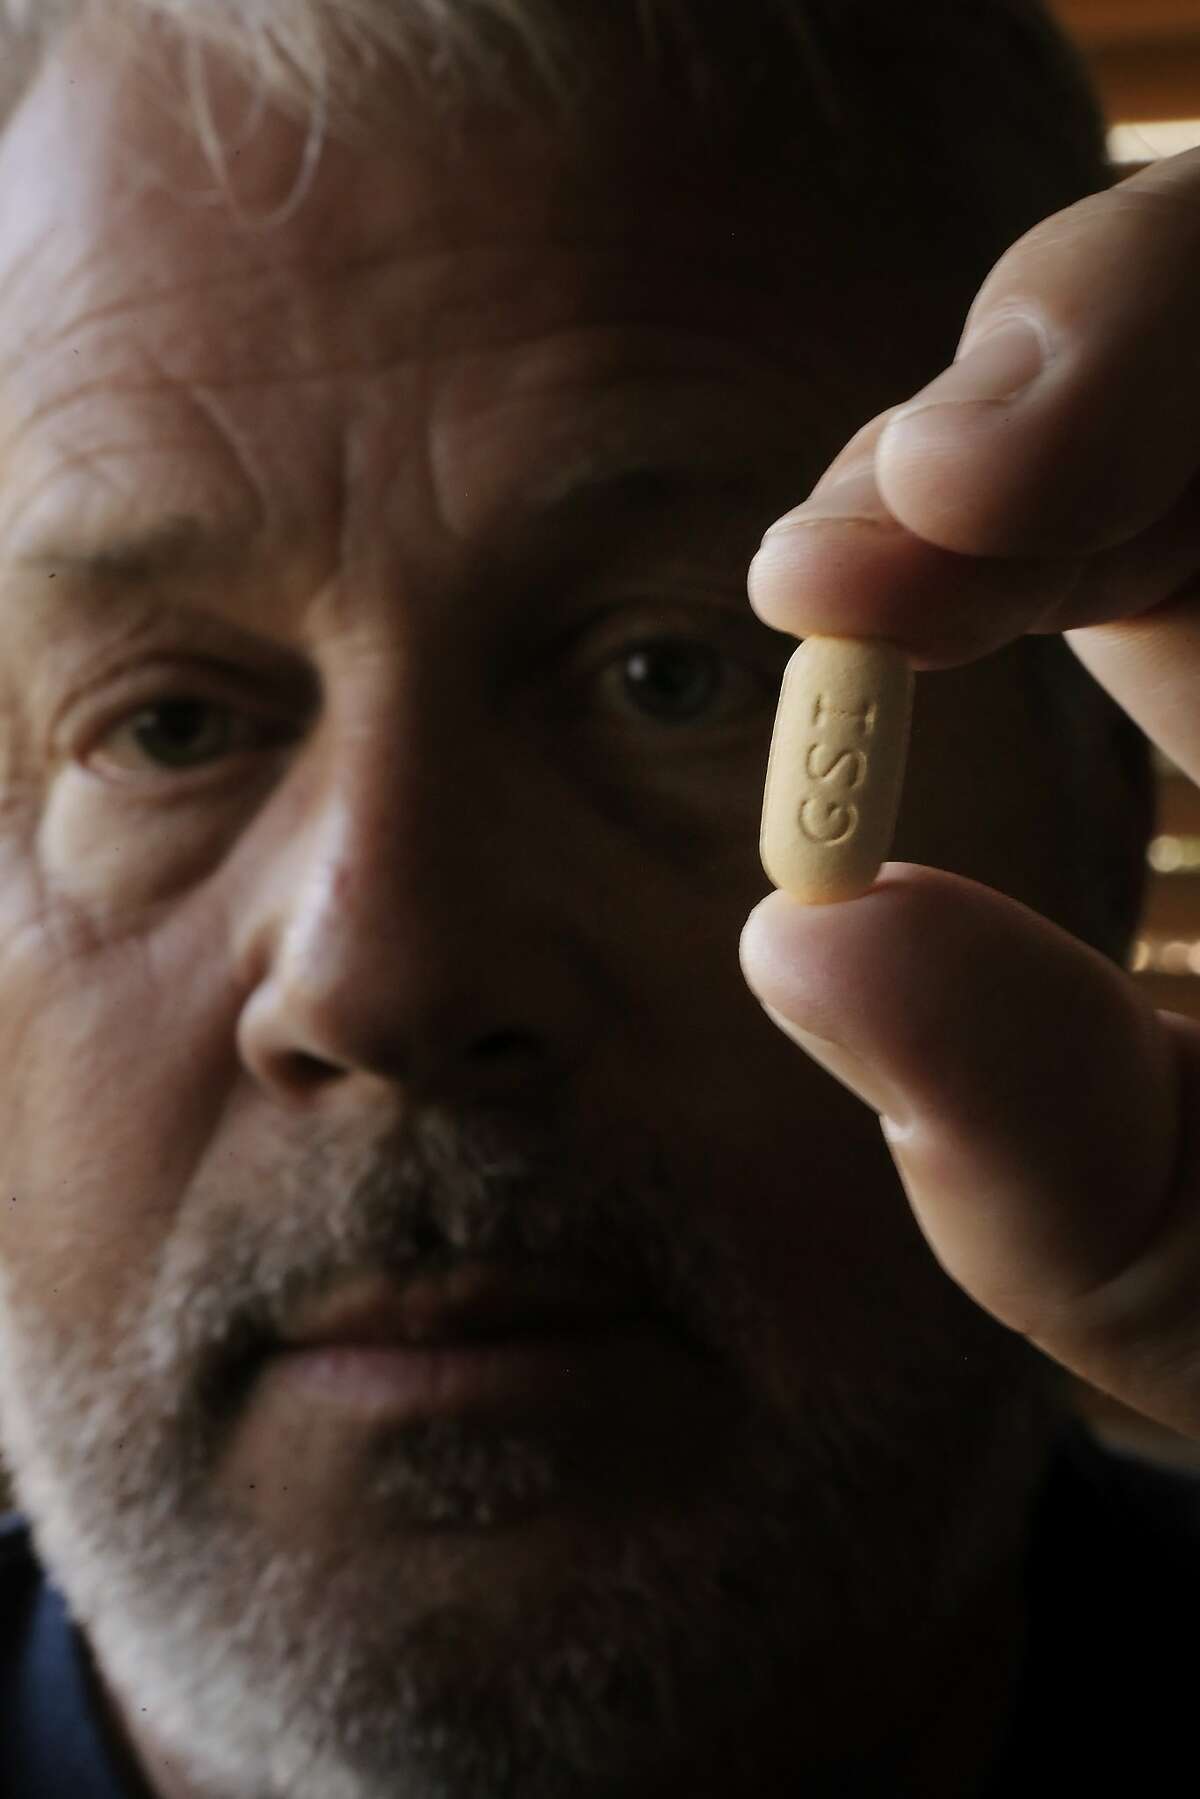 Scott Barnes holds a pill of Sovaldi in his San Luis Obispo, Calif., home on Wednesday, April 30, 2014. Barnes is a Vietnam War army veteran who suspects he caught hepatitis C (before it was known by that name) toward the end of the war (1973) but wasn't officially diagnosed until the 2000s. He was able to convince his VA doctors to help him get on a regimen of Sovaldi, a drug developed by Gilead Sciences, which is hailed as a cure for hepatitis C. He has stage IV hep C, and sees this treatment as his last chance.